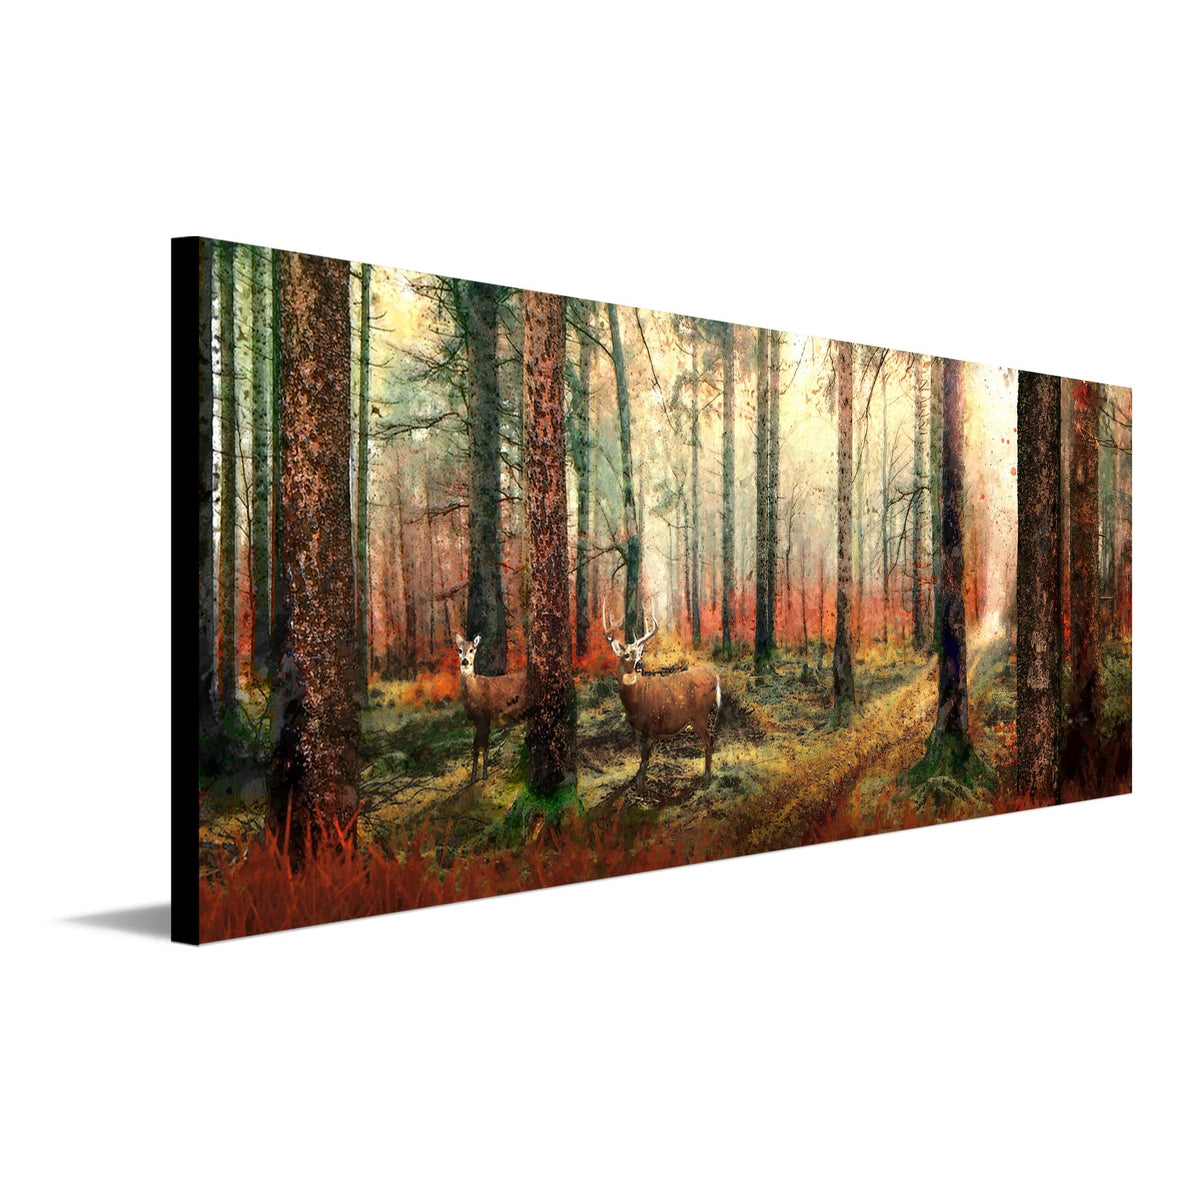 Woodland forest art - Vibrant with colors and personalized for you